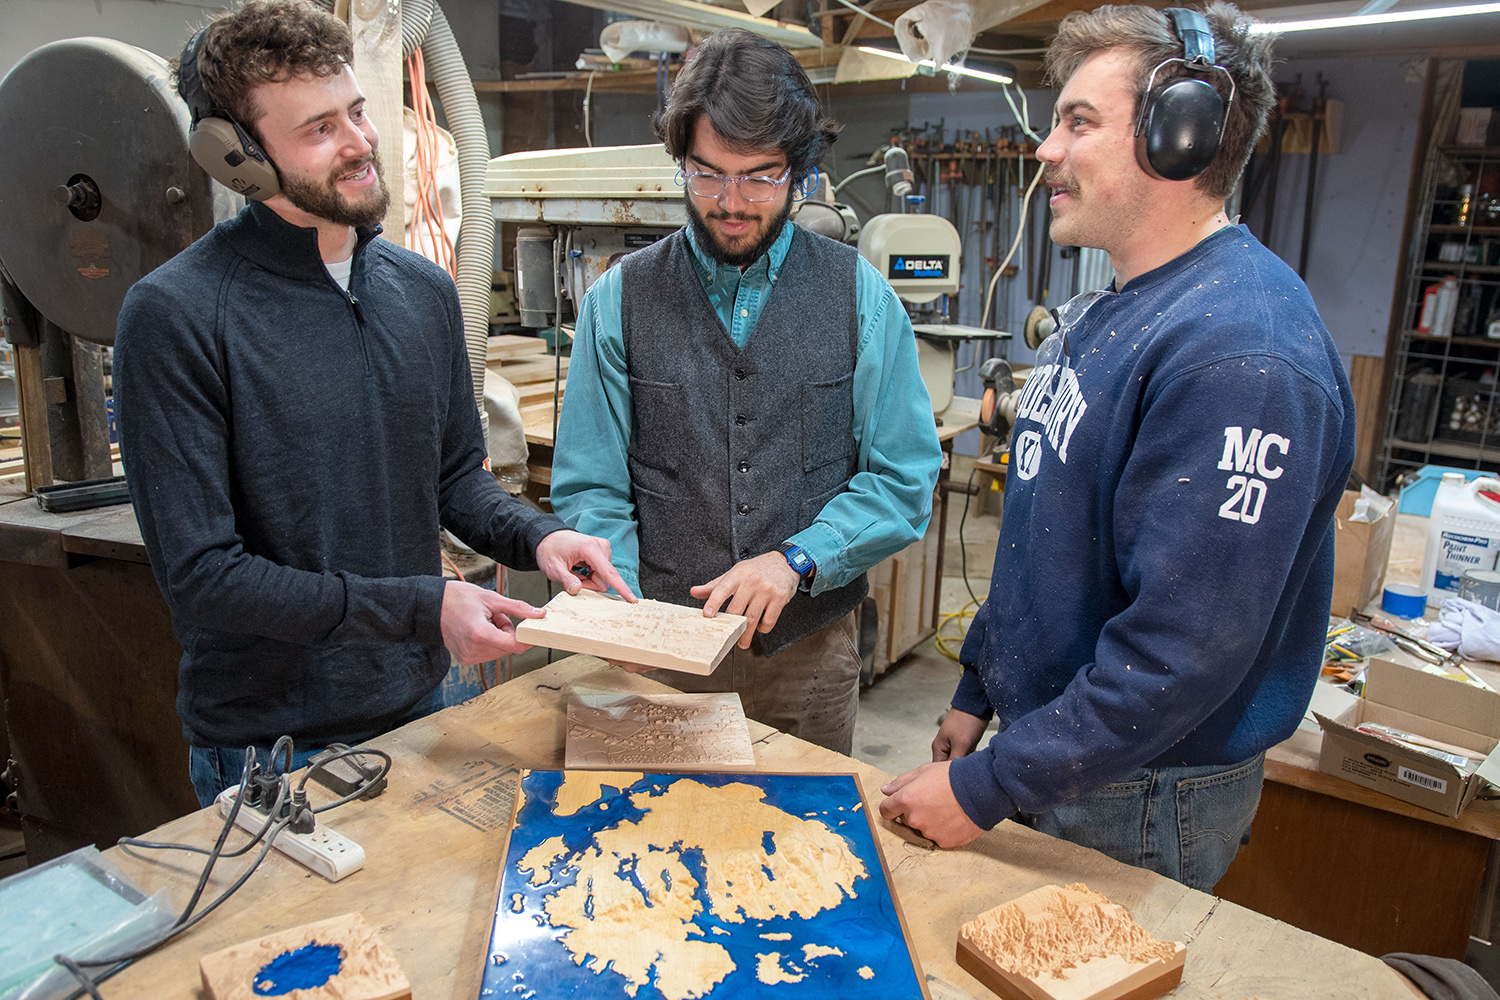 Connecting People to Place, Middlebury Grads Return to VT to Start Woodworking Business